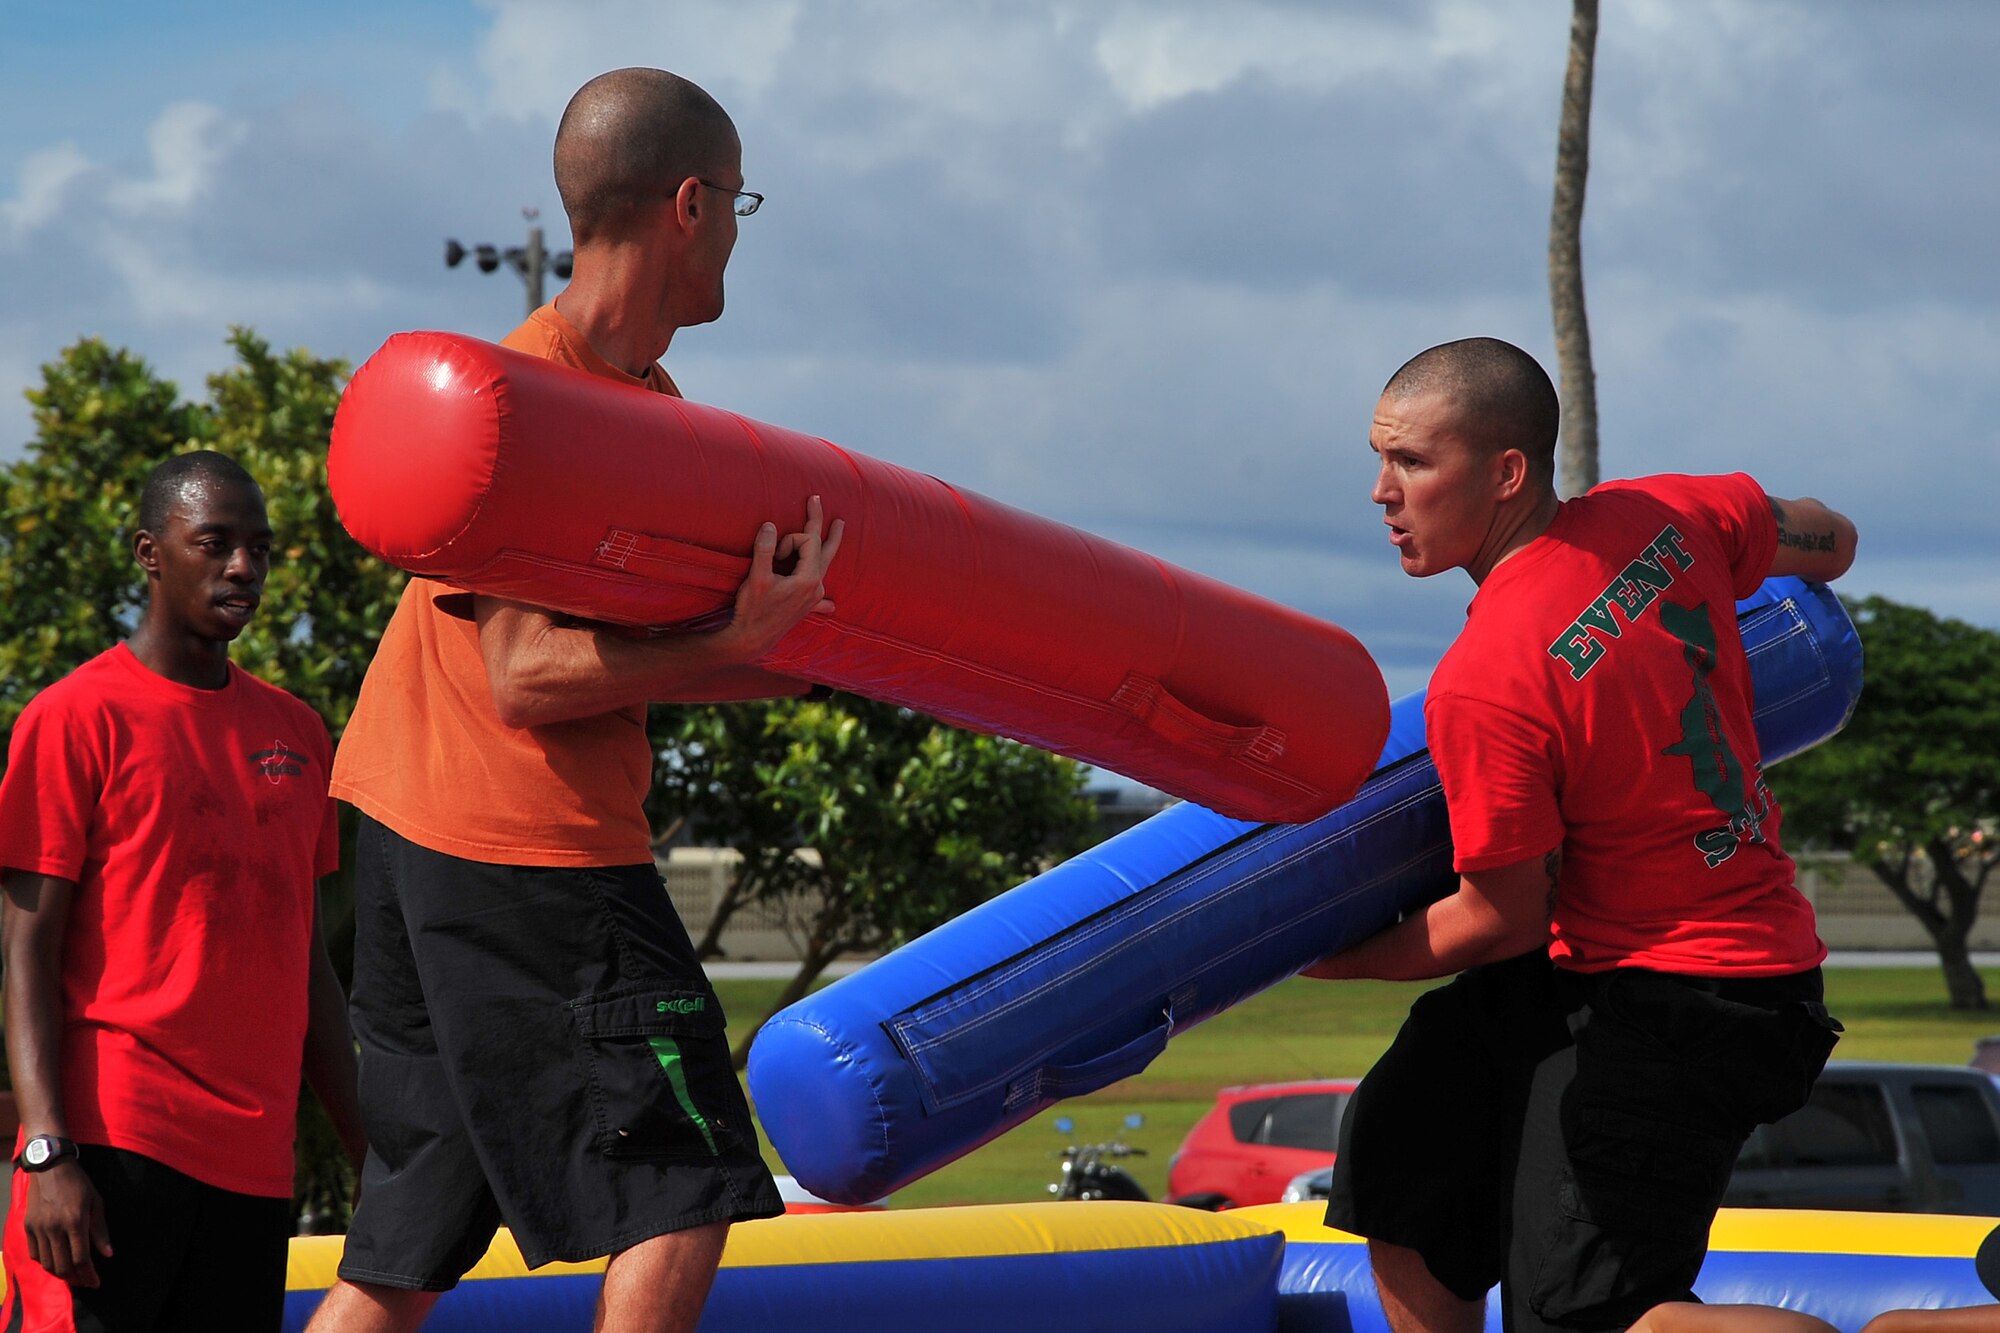 Master Sgt. Garrett Toomas, 36th Wing Command Post, and Army Spc. Matthew Harris, 94th Army Air and Missile Defense Command, participate in the Last Man Standing contest during the Labor Day Bash Aug. 30, 2013, on Andersen Air Force Base, Guam. More than 200 military members and their families attended the event which was held at the Arc Light Memorial Park. (U.S. Air Force photo/Staff Sgt. Melissa B. White/Released)